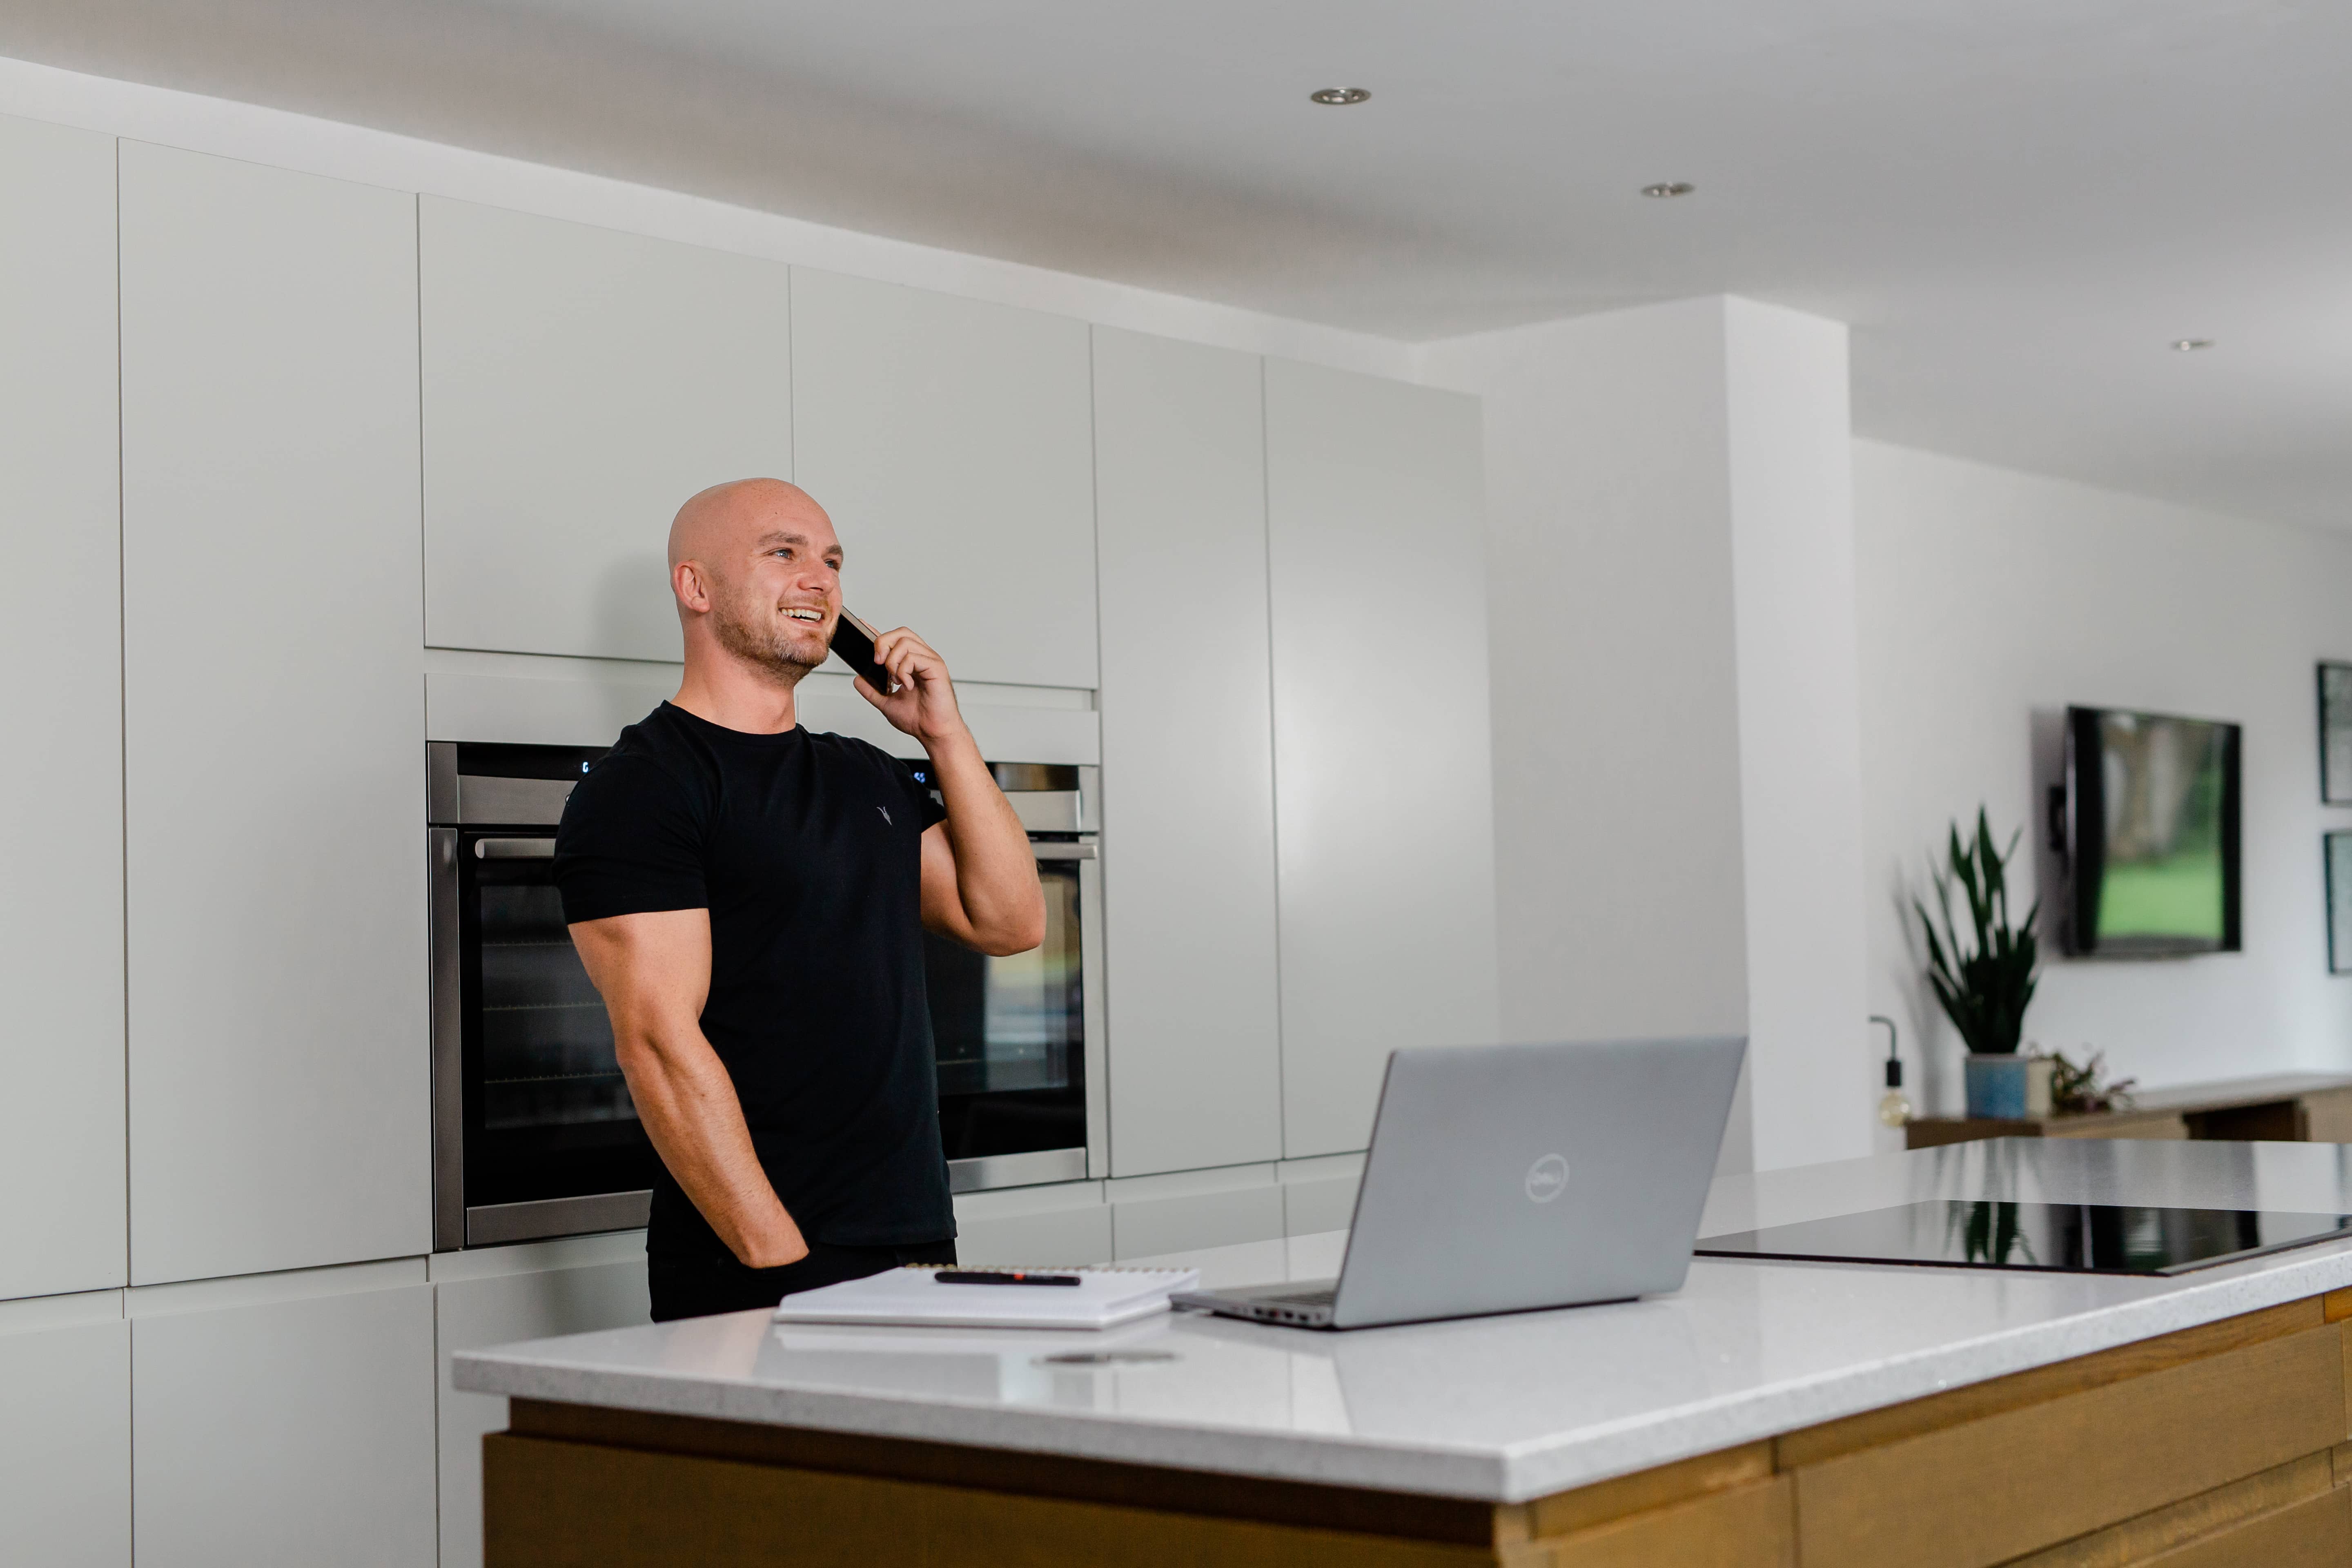 Smiling man in a black t-shirt standing in a modern kitchen with white walls, speaking to a customer on his phone